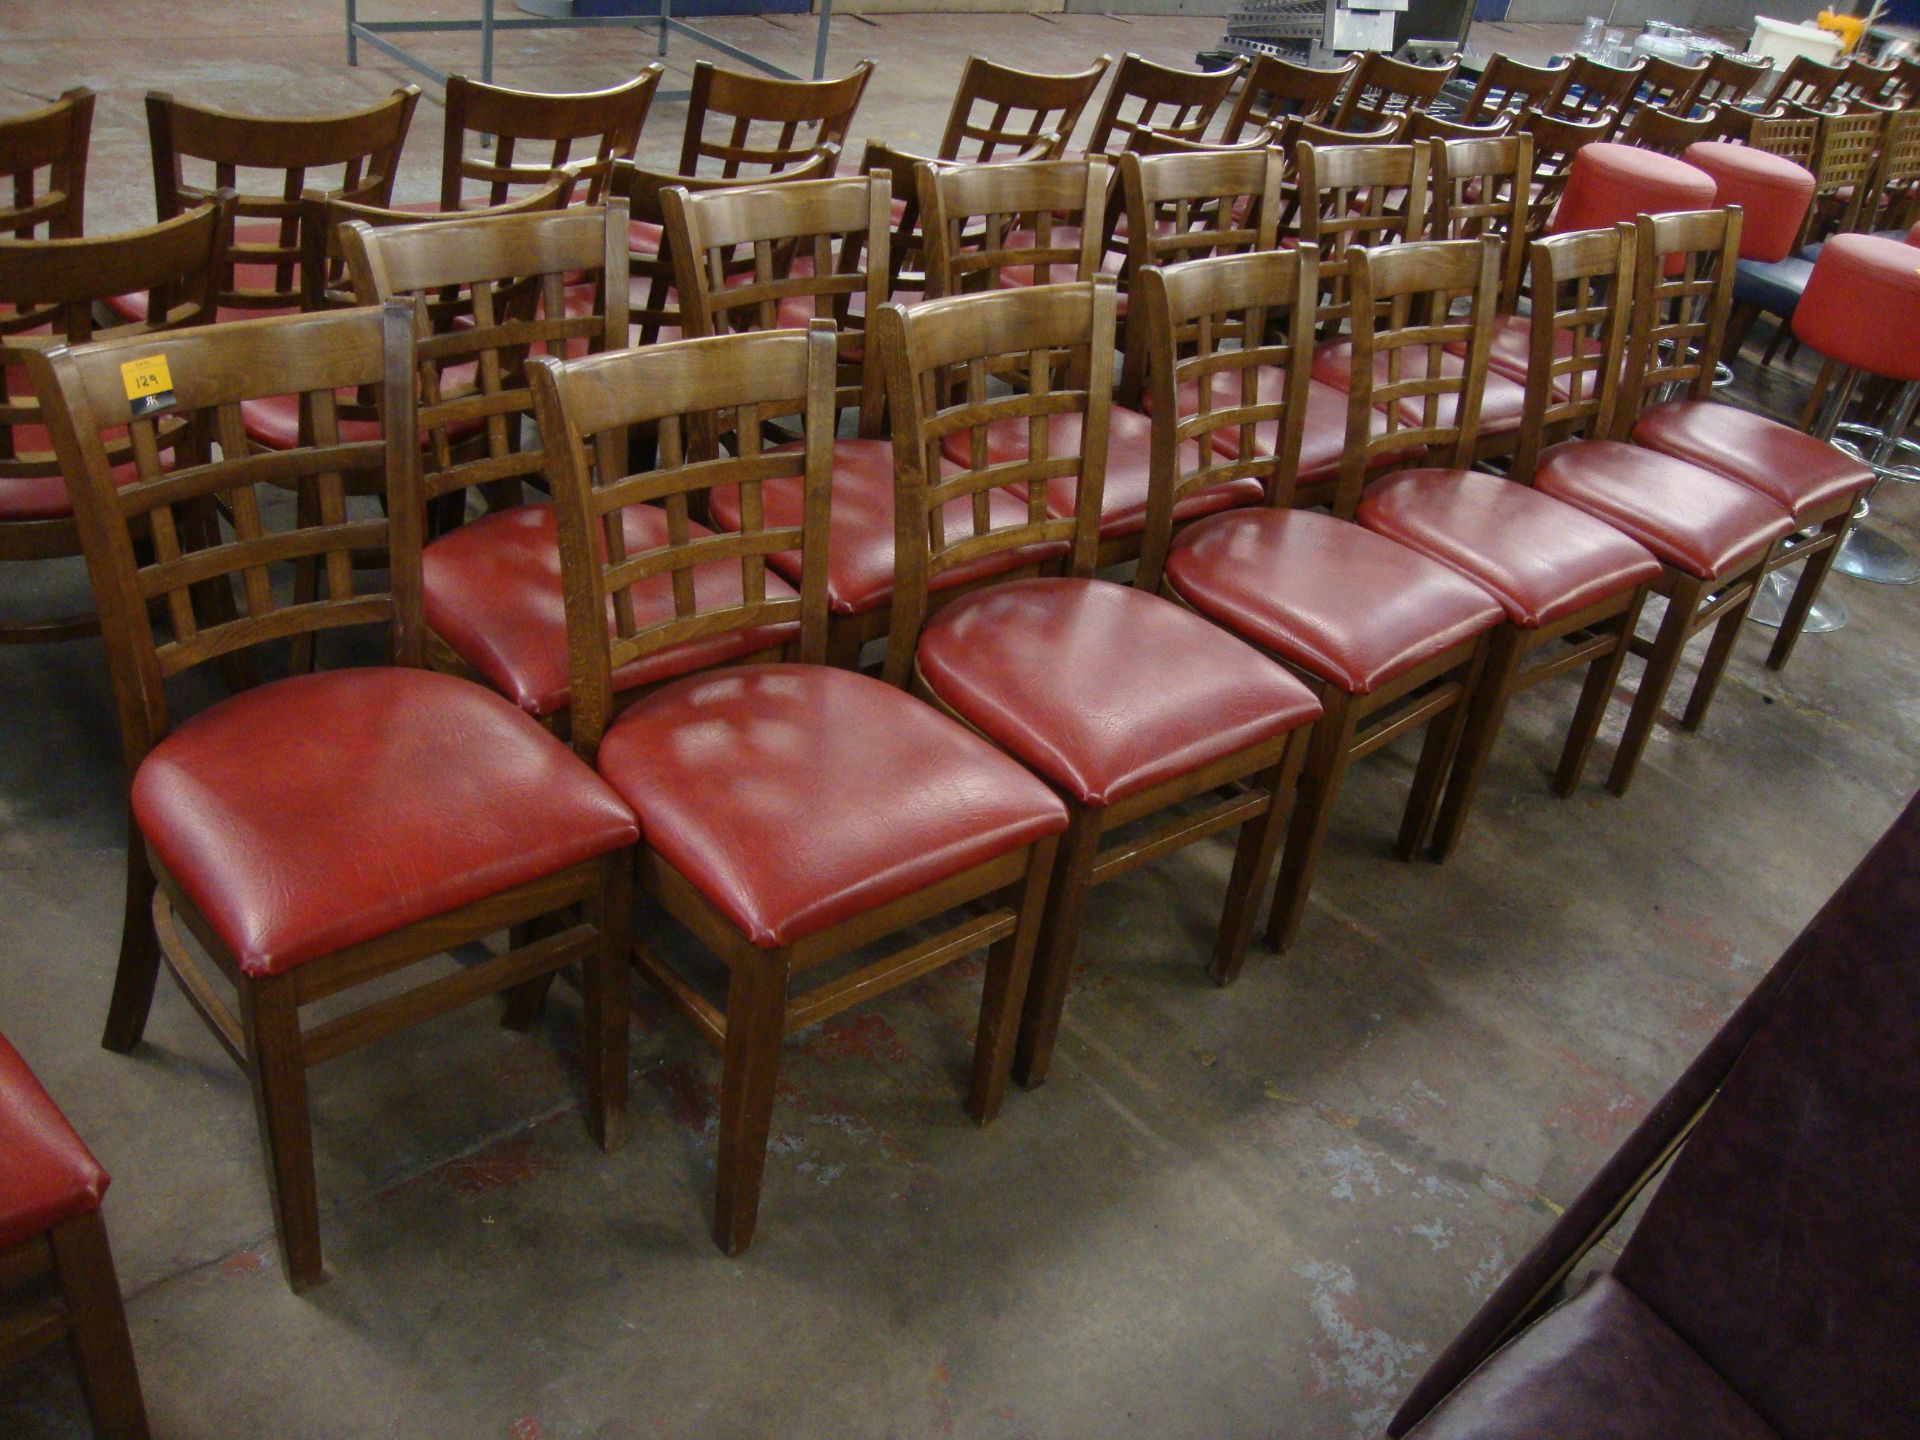 13 off wooden chairs with red upholstered bases. NB lots 121 – 129 consist of different quantities